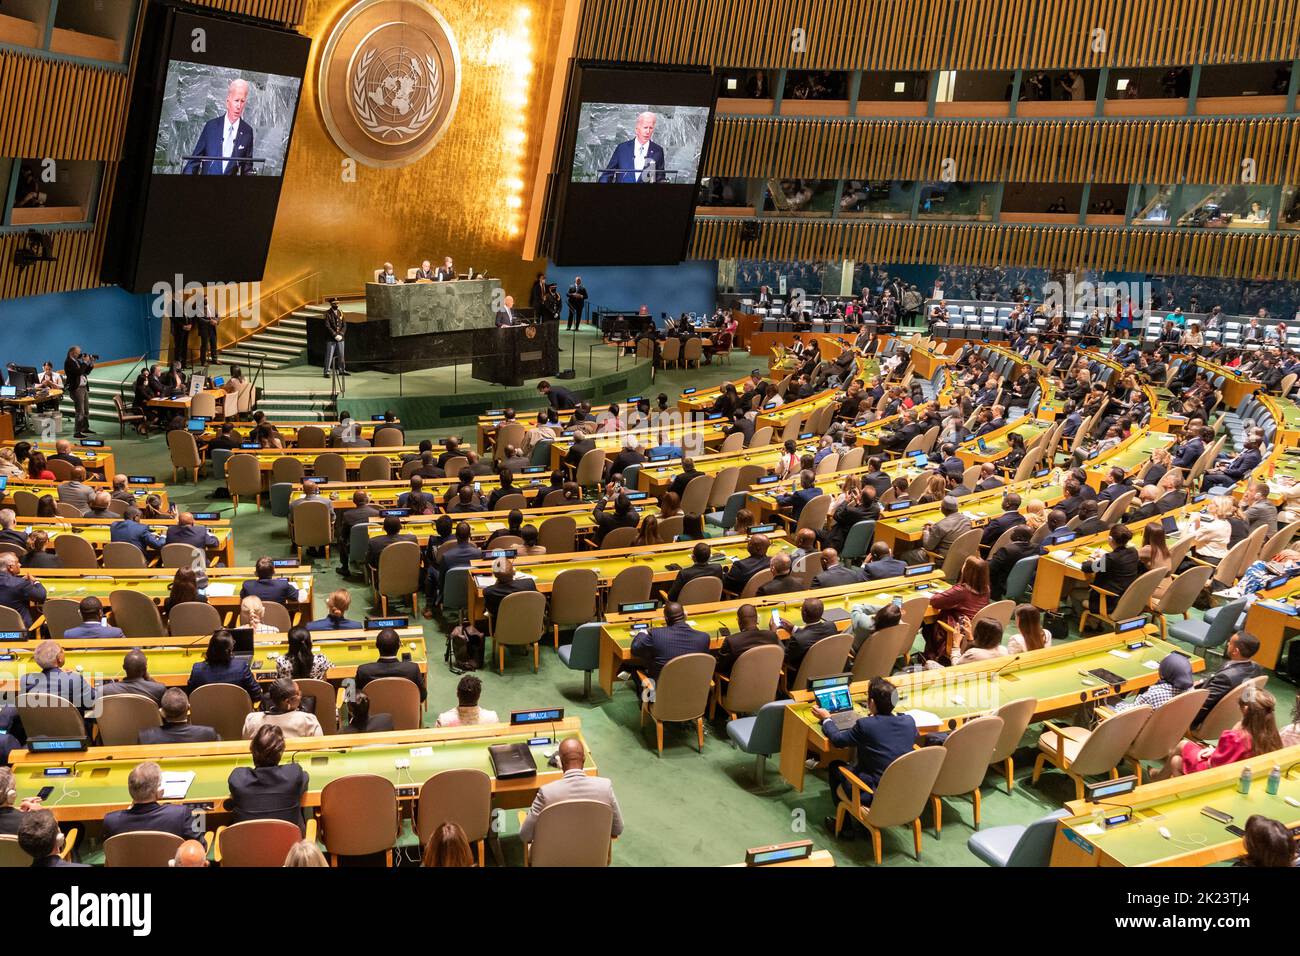 New York City, United States. 21st Sep, 2022. U.S. President Joe Biden delivers an address to the 77th Session of the U.N General Assembly, September 21, 2022, in New York City. Credit: Ron Przysucha/State Department Photo/Alamy Live News Stock Photo